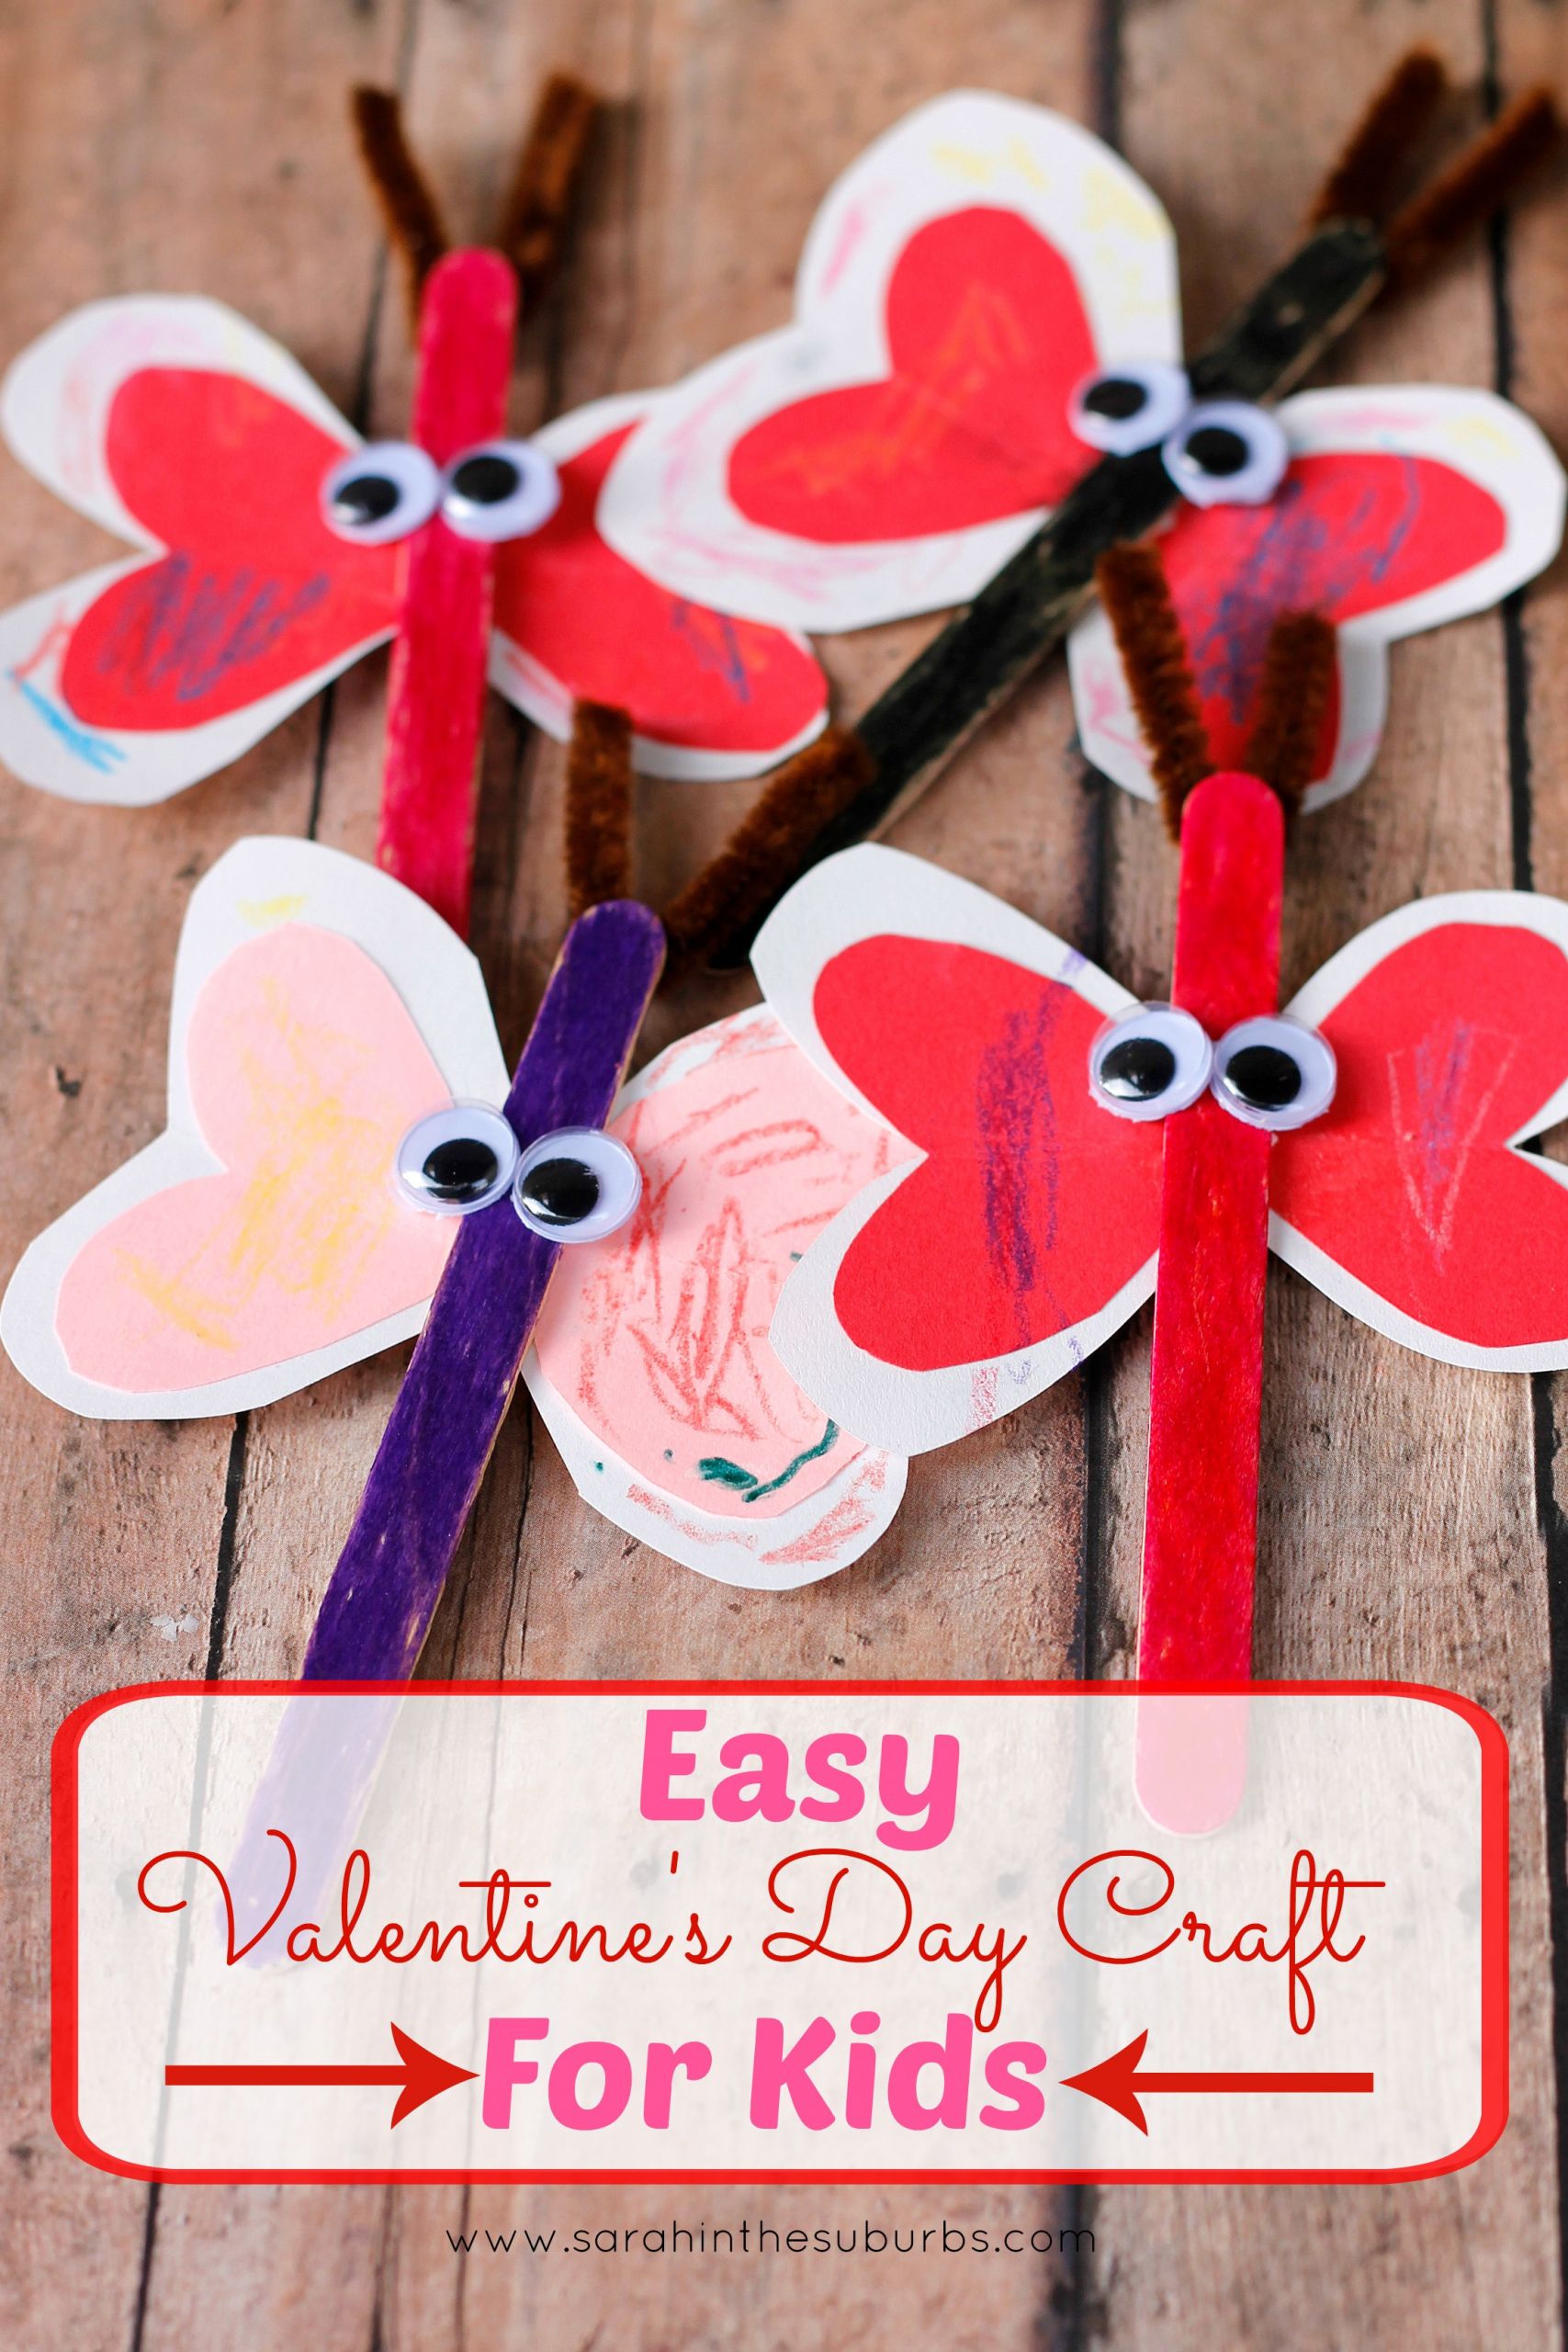 Easy Crafts For Preschoolers
 Easy Valentine s Day Craft for Kids Sarah in the Suburbs